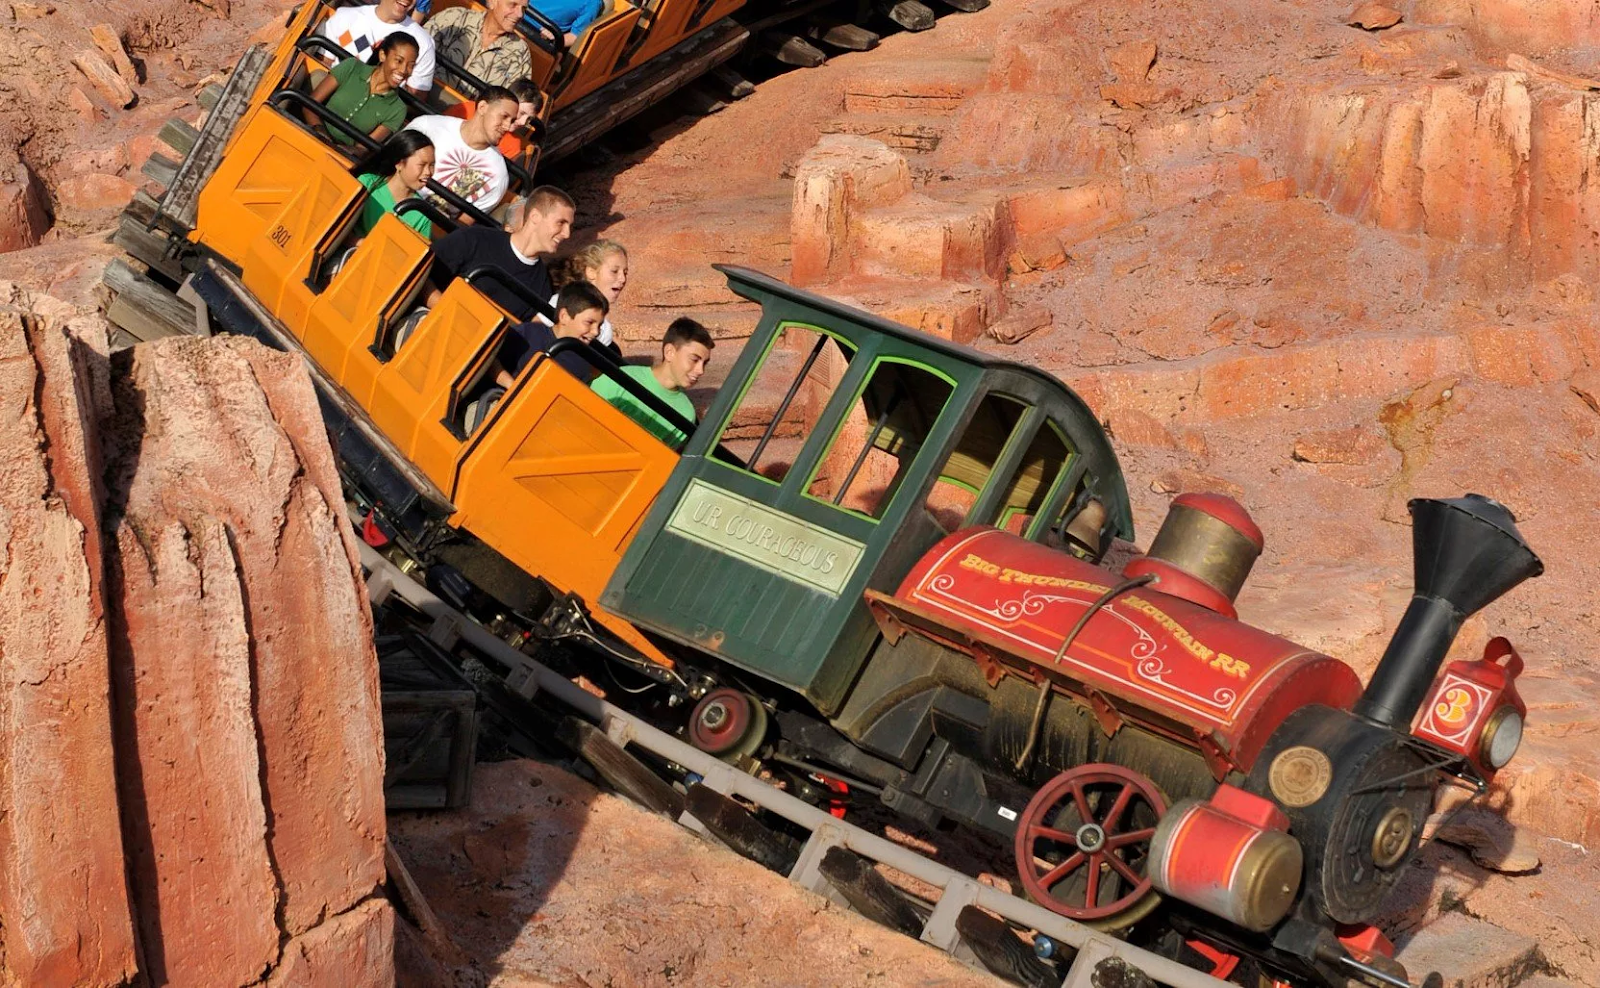 Disney Parks Shares A Ride And Learn Trip Aboard Big Thunder Mountain Railroad Laughingplace Com